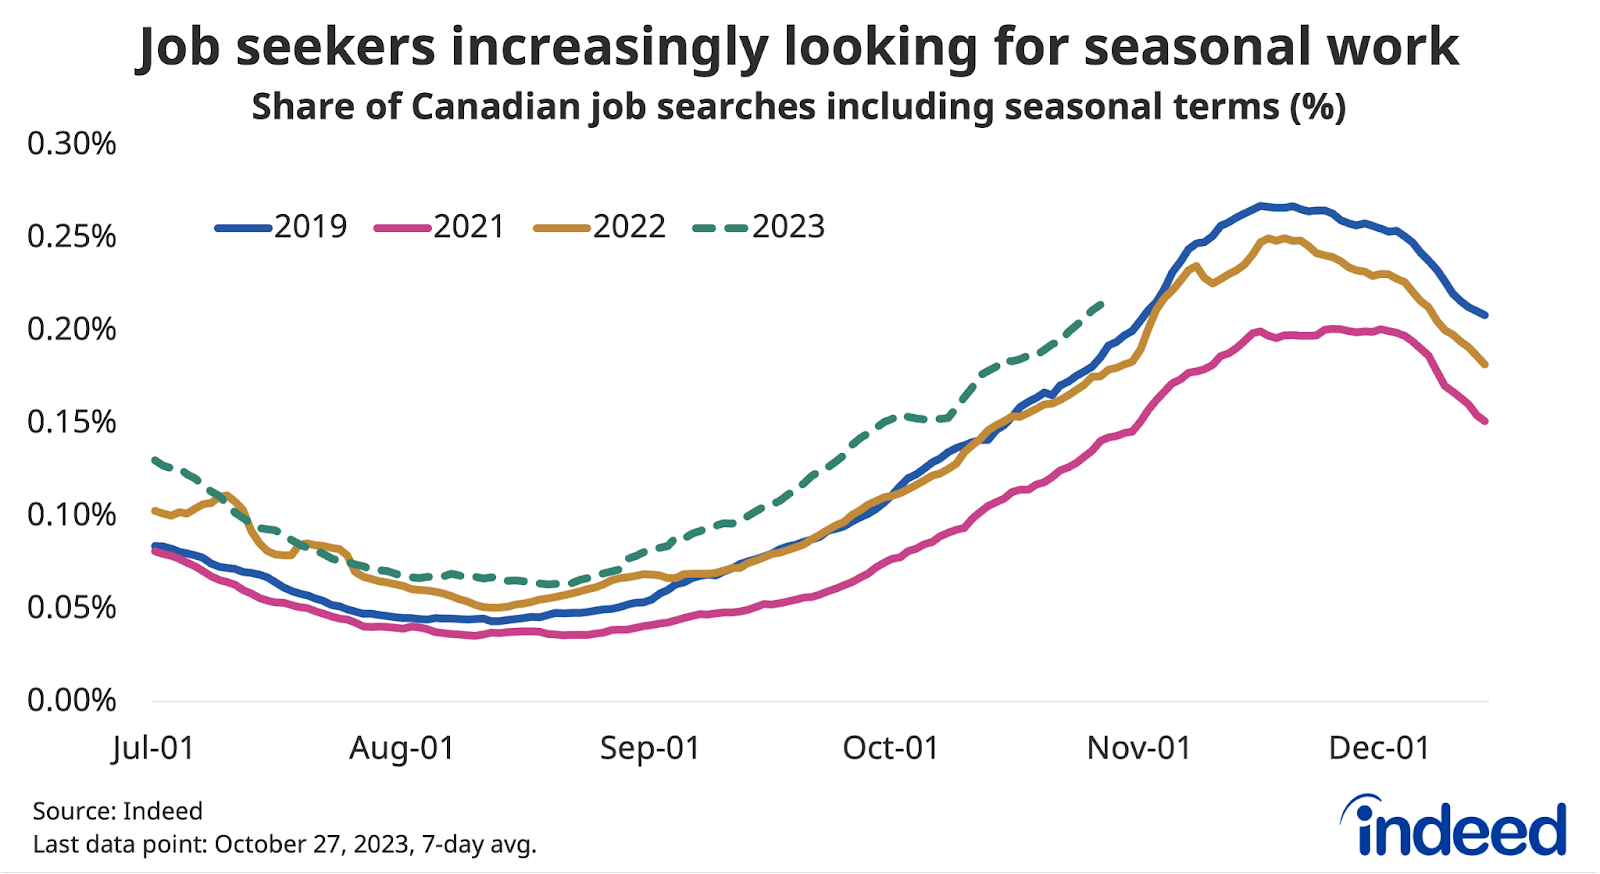 Line chart titled “Job seekers increasingly looking for seasonal work,” shows the share of Canadian job seeker searches including seasonal-related terms, with different coloured lines representing their share in 2019, 2021, 2022, and 2023, respectively. As of November 3, 2023, the seasonal search share was higher than it had been in recent years. 